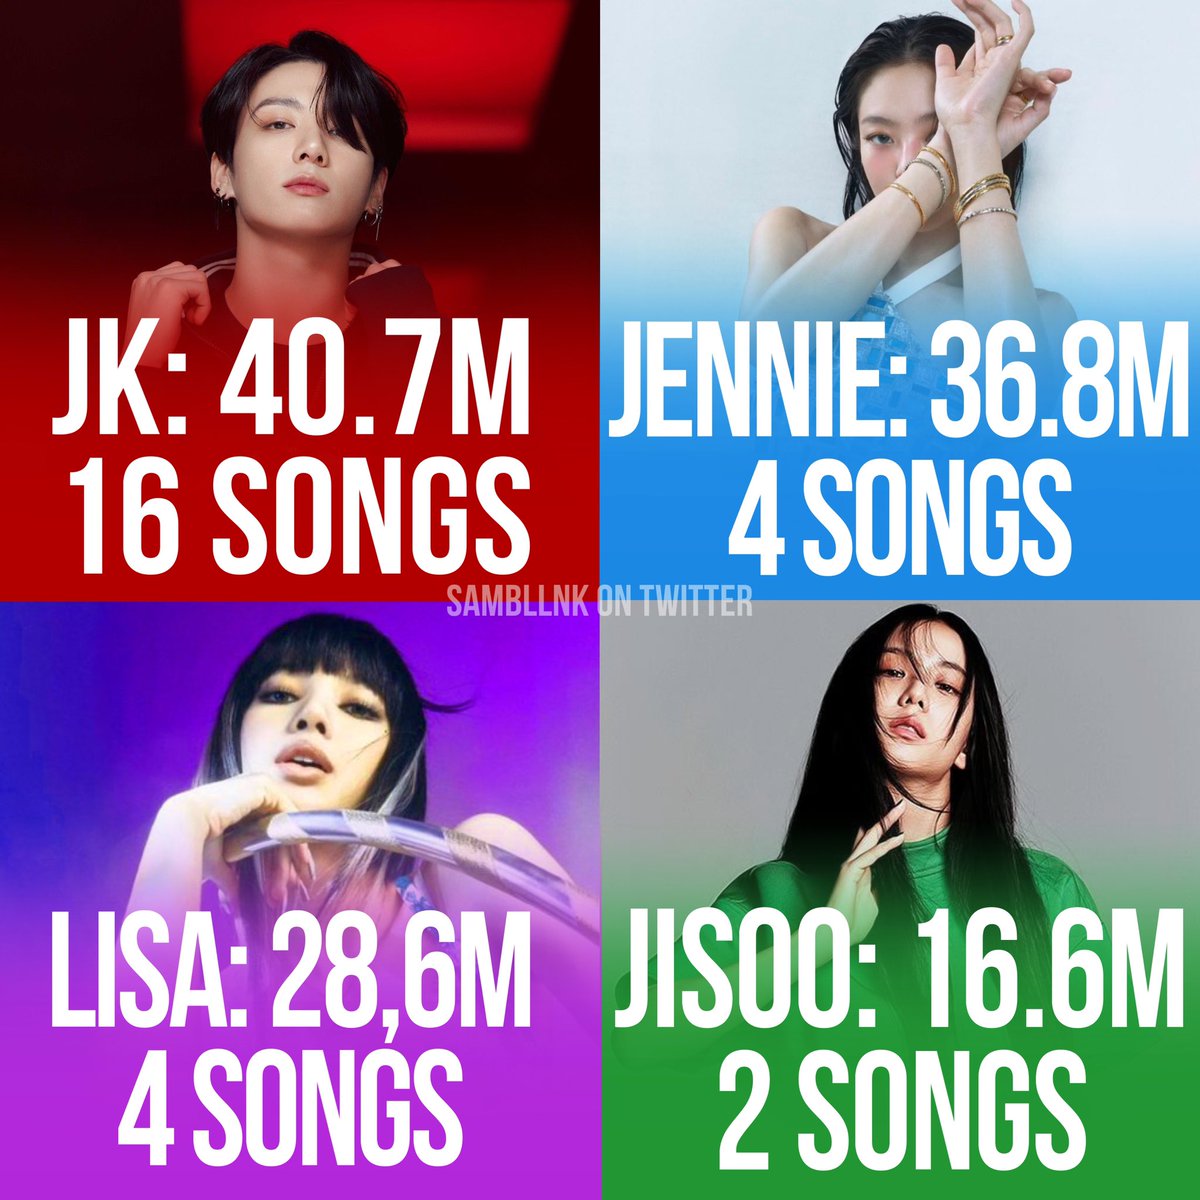 📊Highest monthly listeners peak by K-Pop soloists on Spotify of all time: